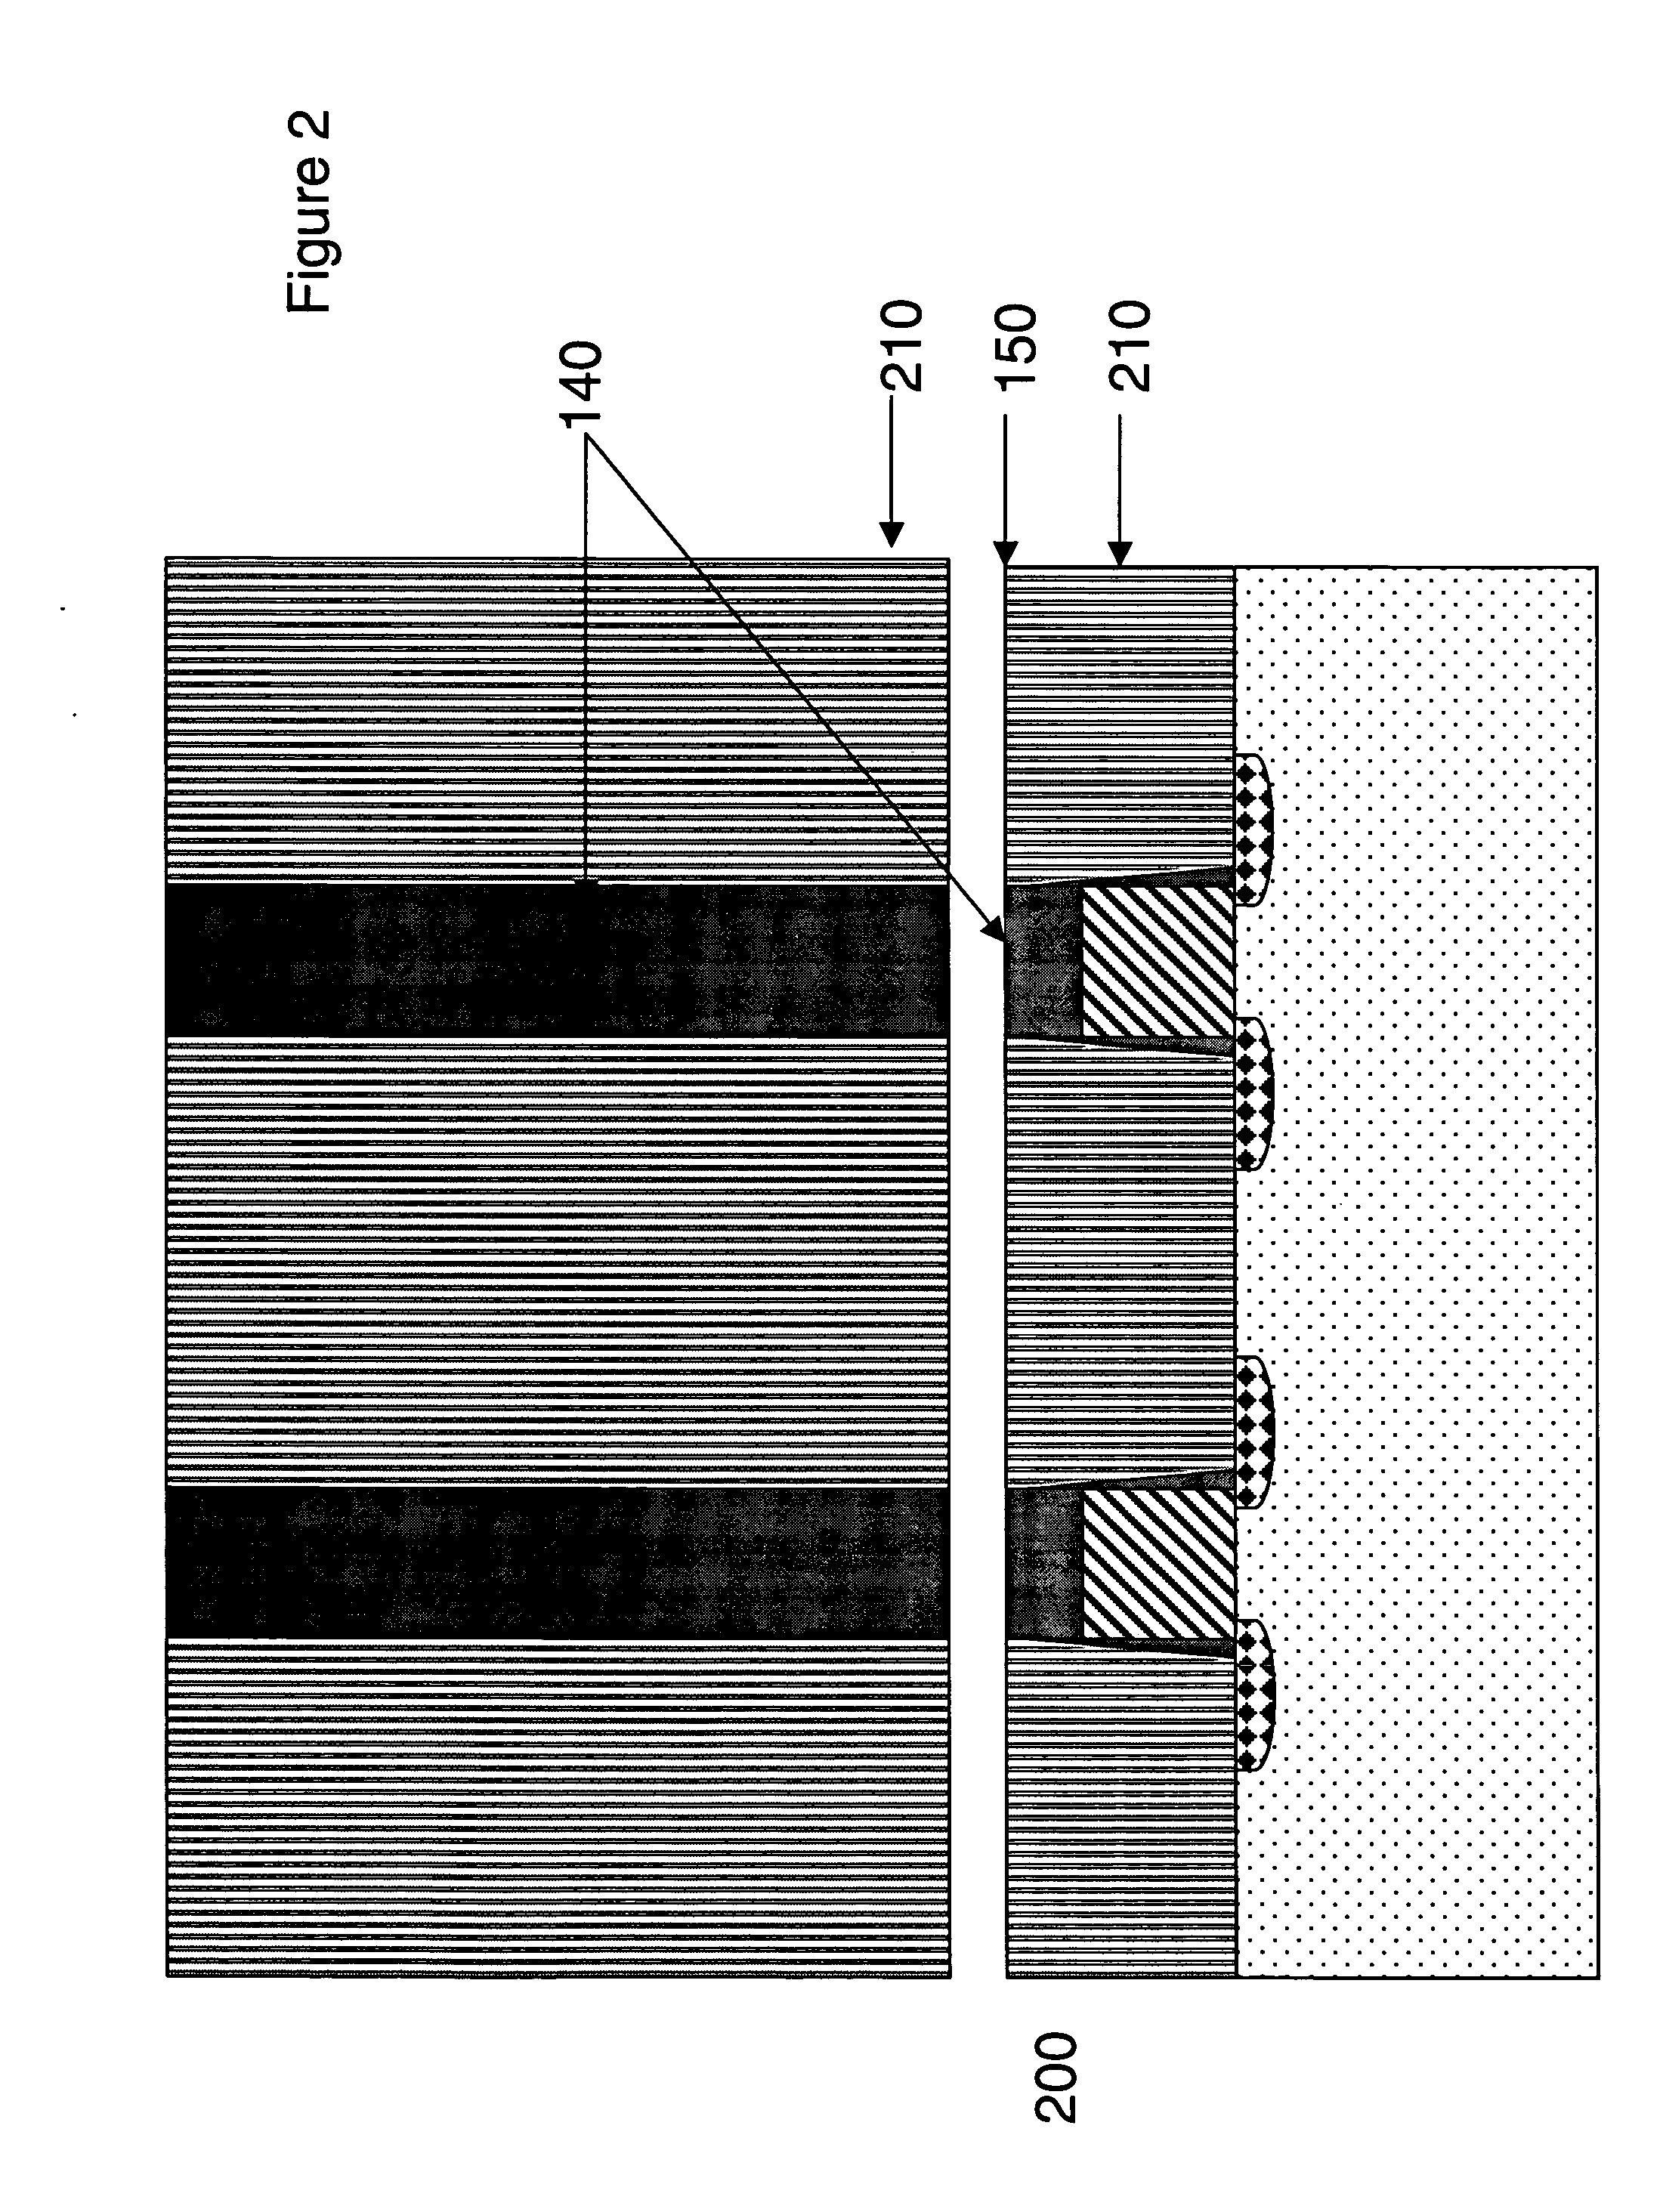 Process for making byte erasable devices having elements made with nanotubes